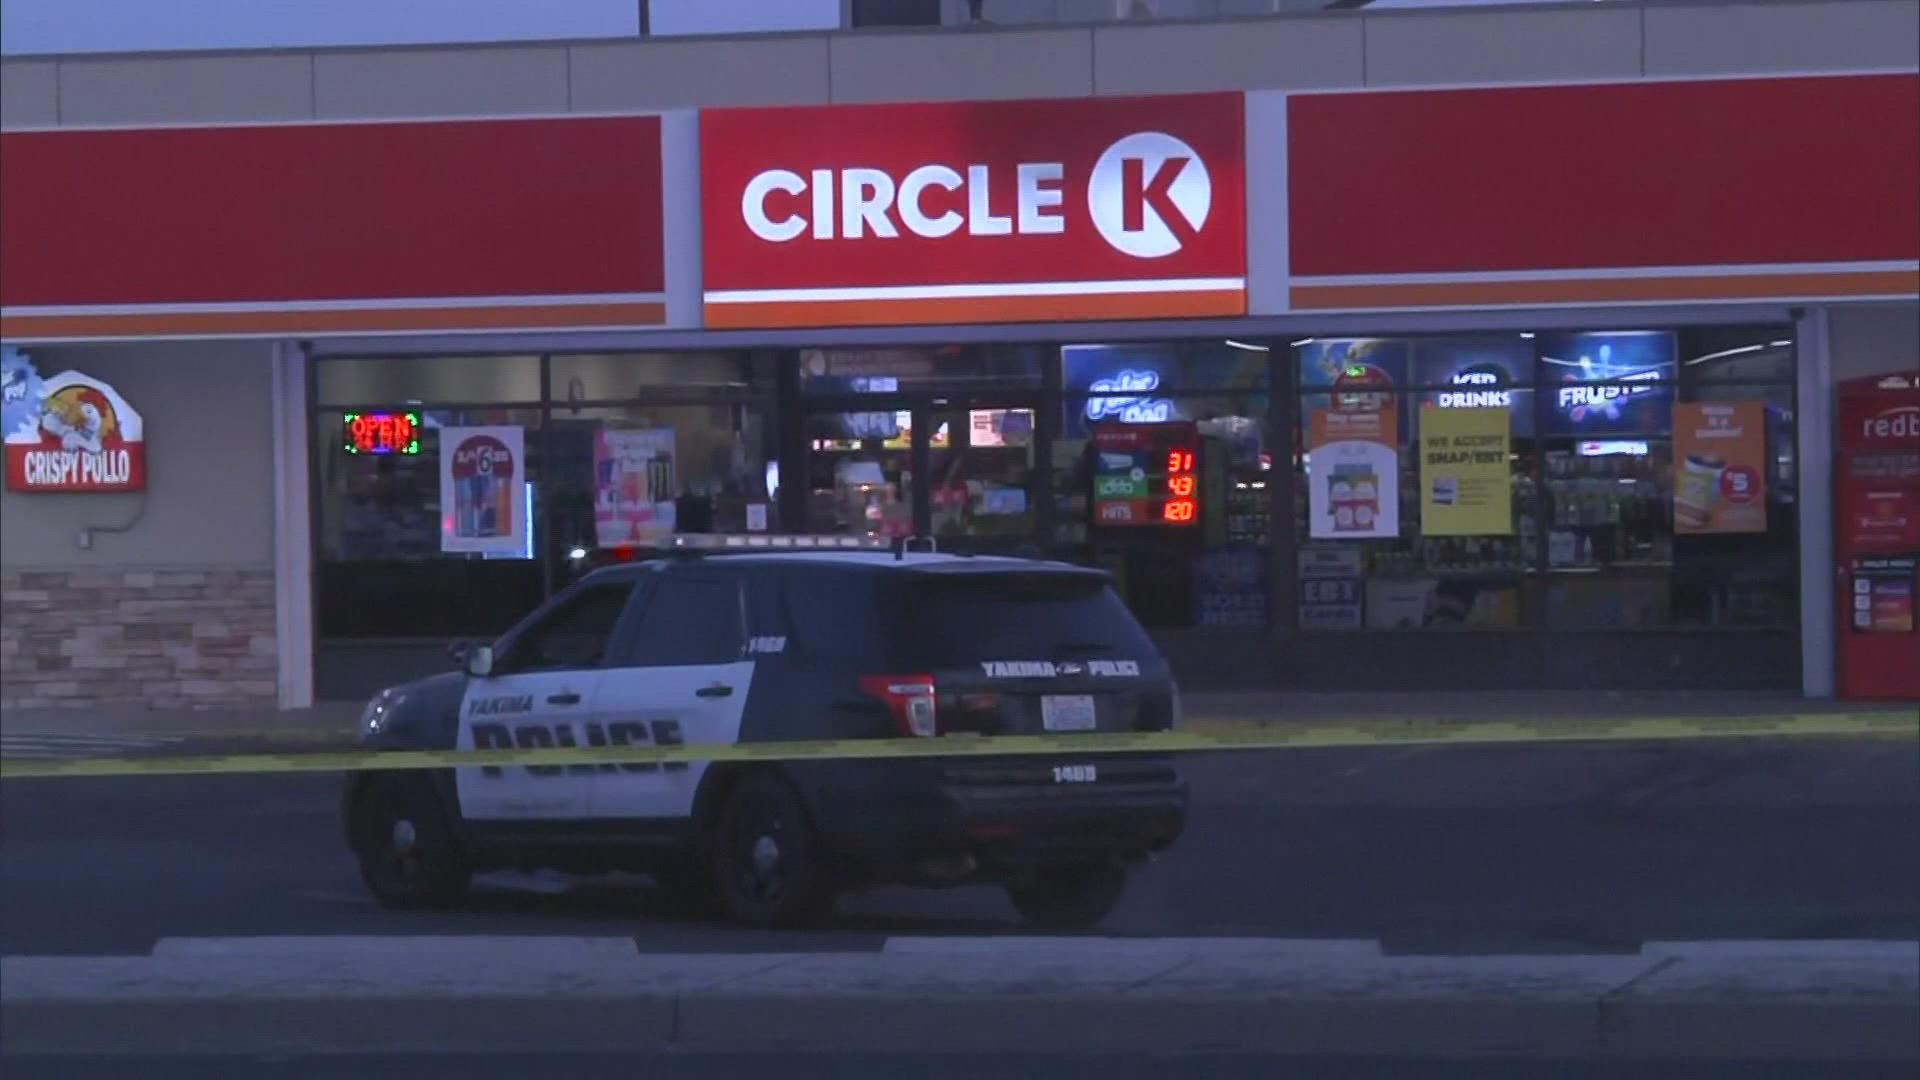 Three people were killed early Tuesday morning after a shooting at a Yakima convenience store. The suspect died from a self-inflicted gunshot wound, police said.